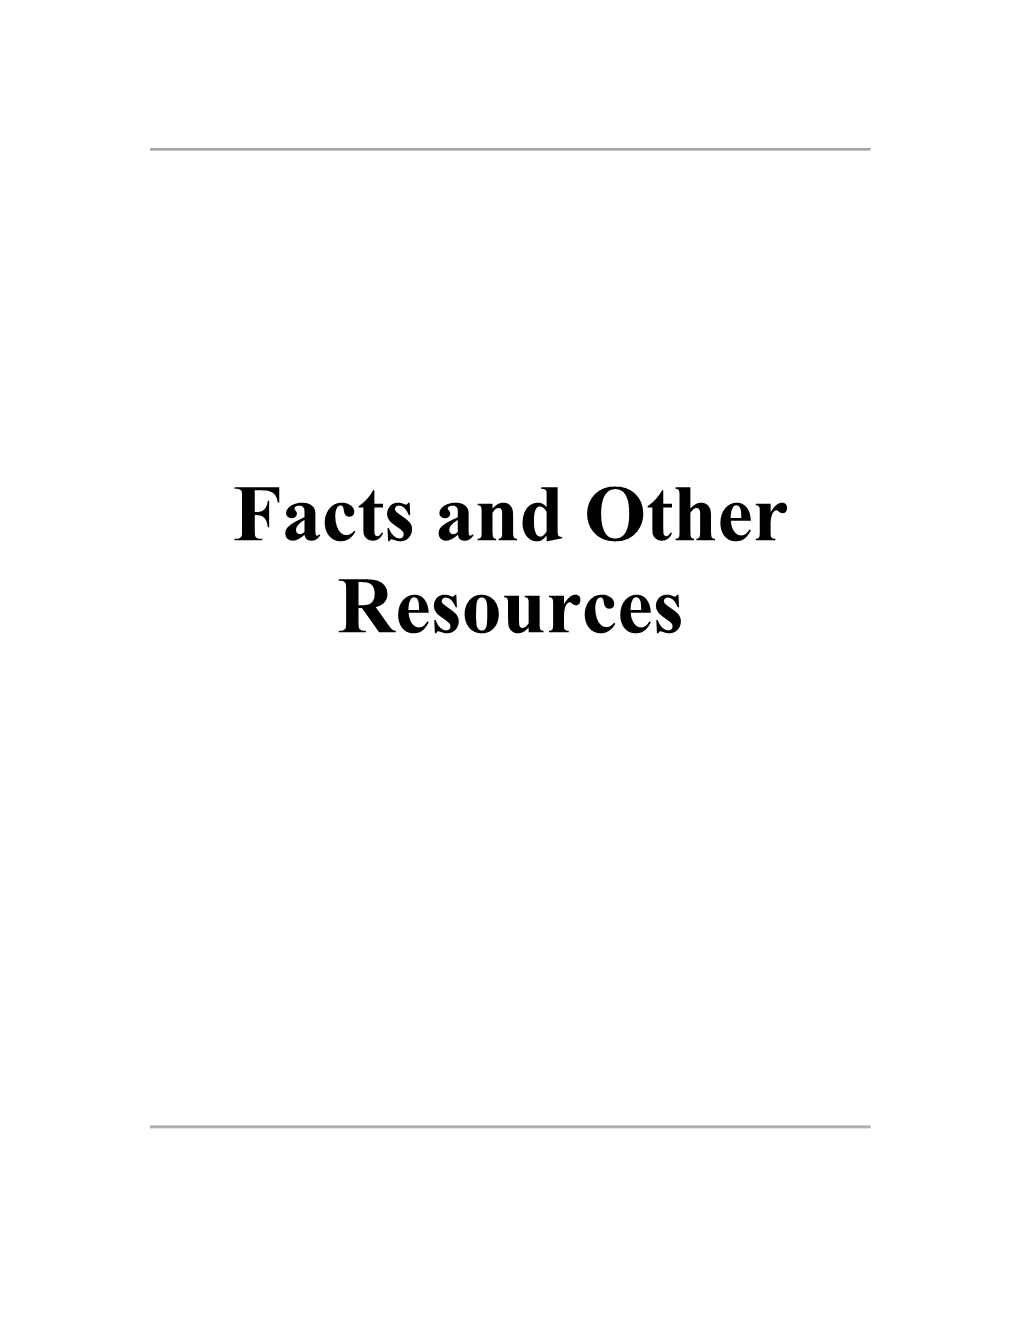 Facts and Other Resources